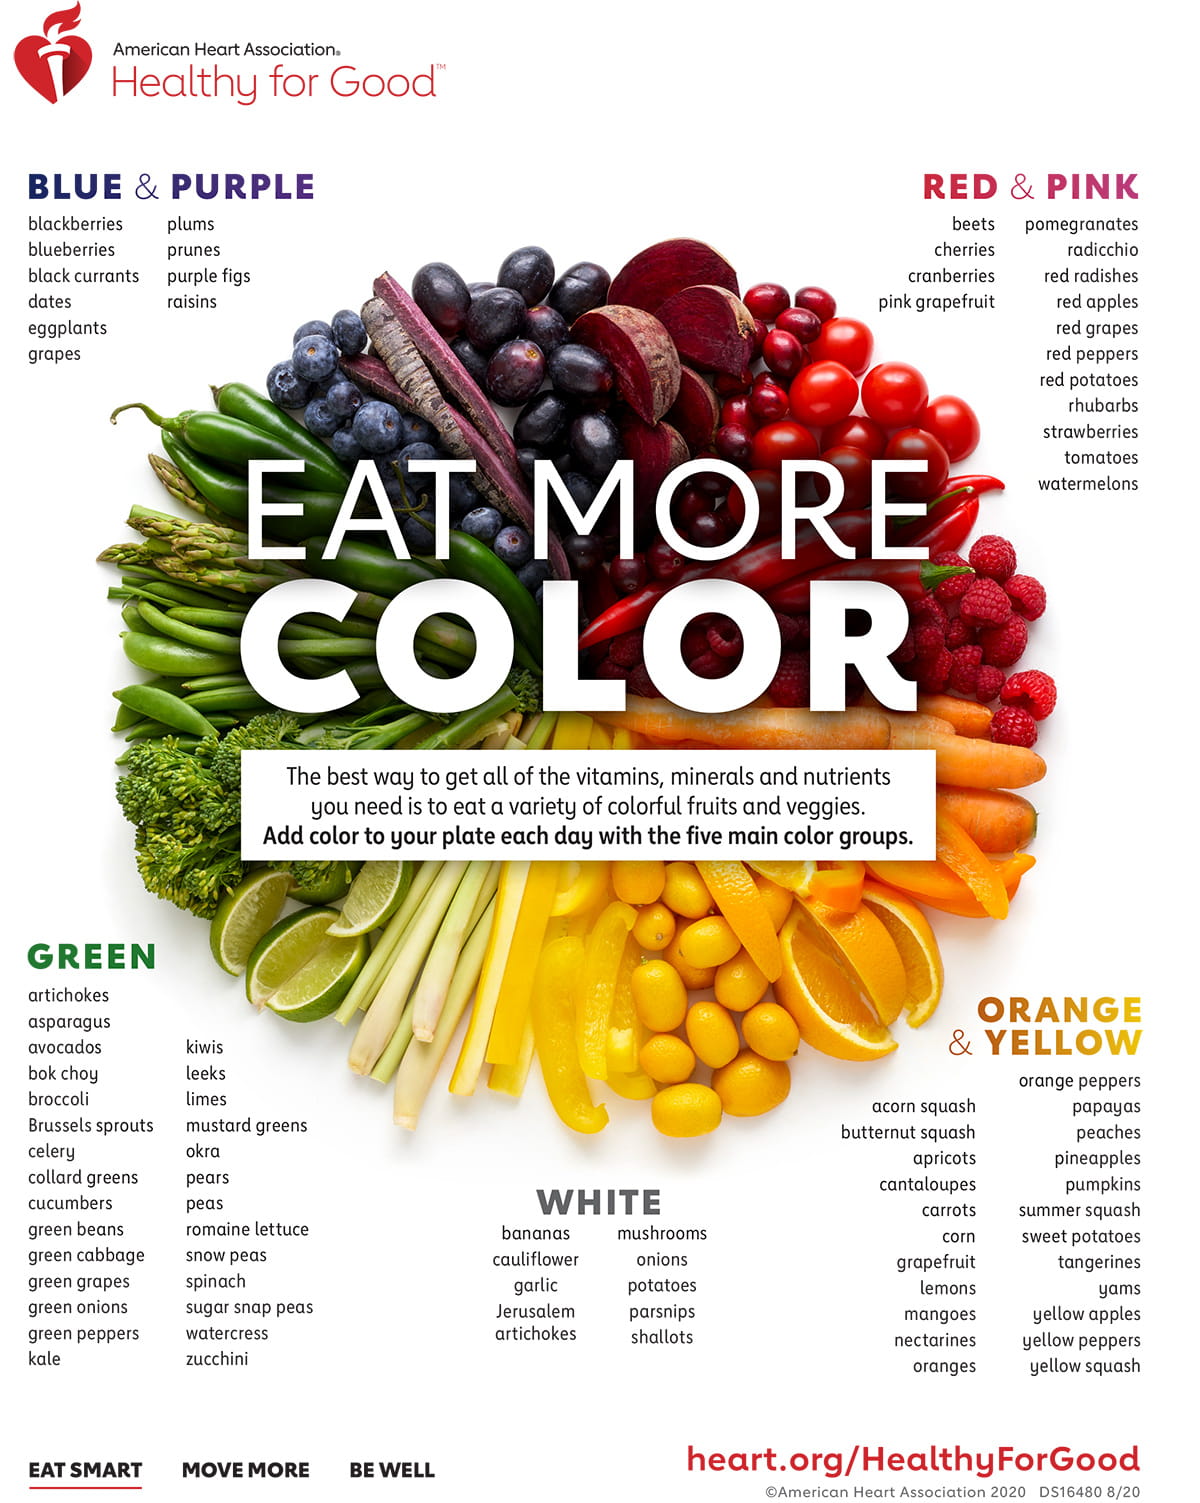 Eat More Color infographic